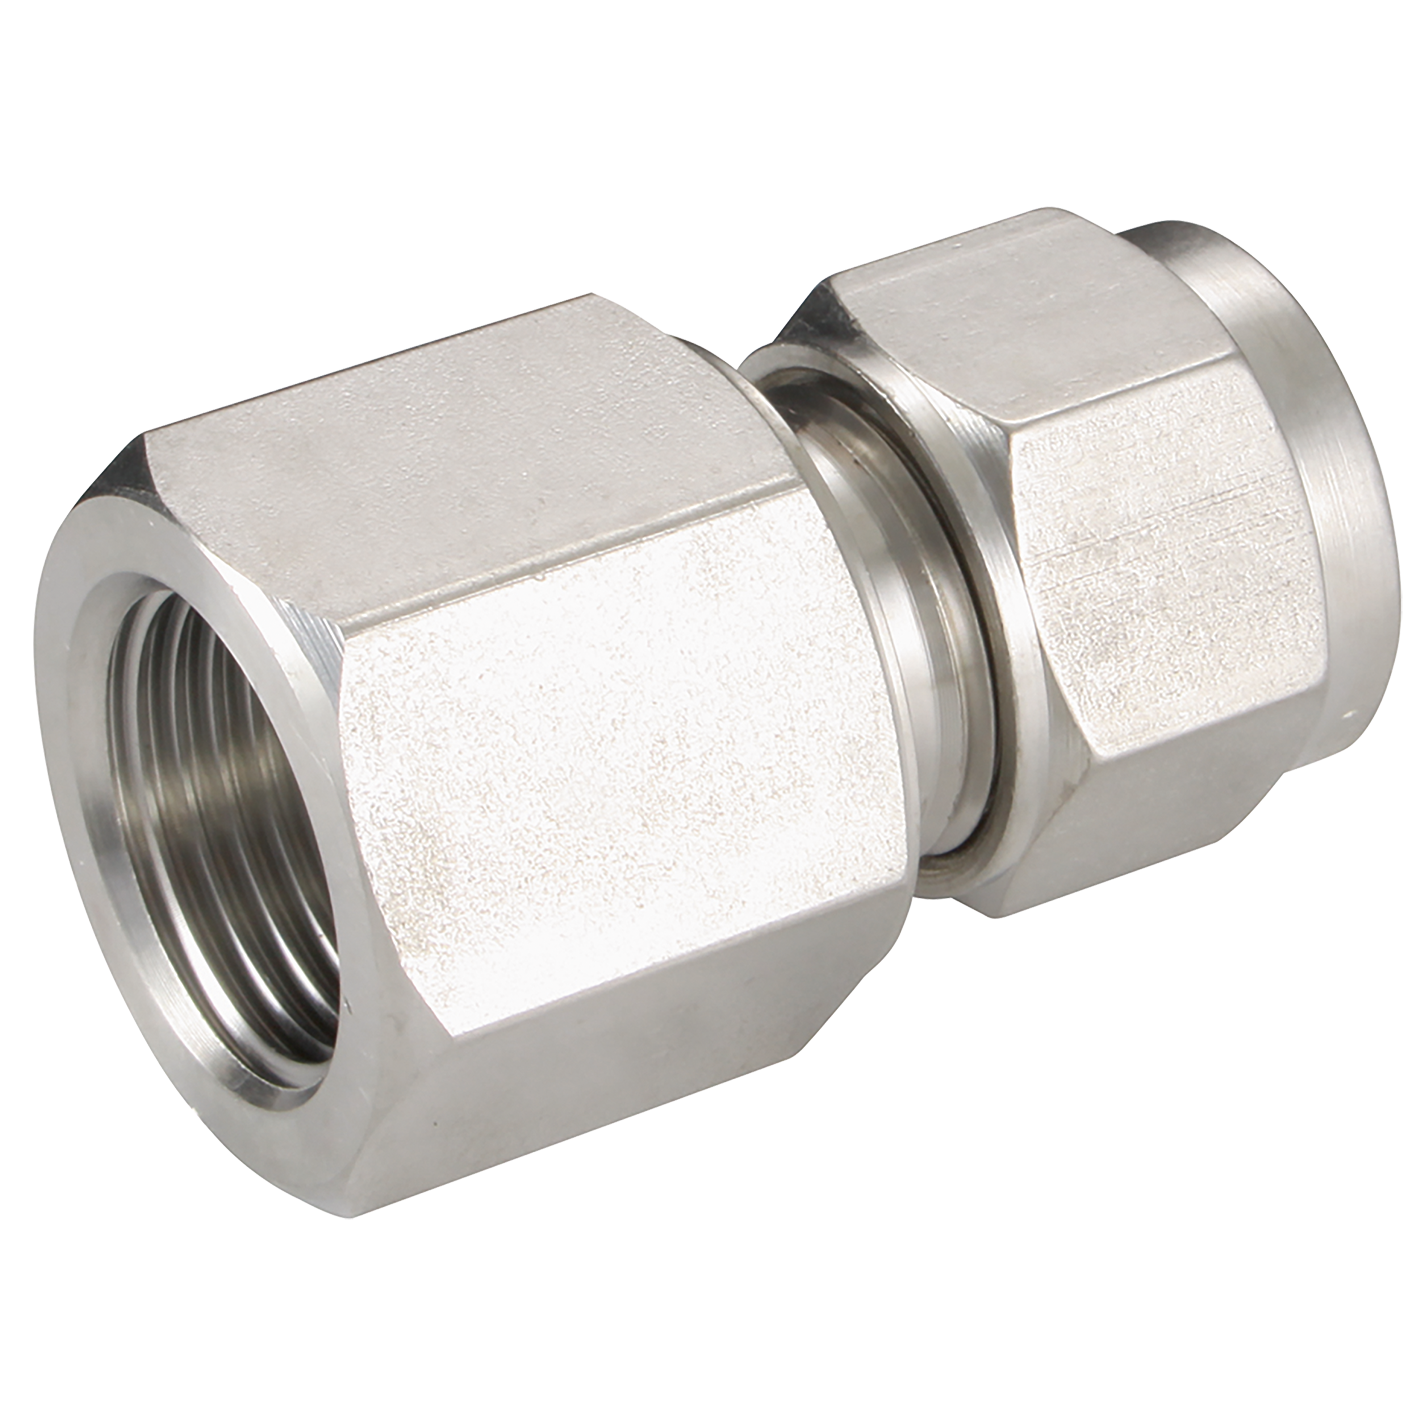 FEMALE ISO CONNECTOR 3/8 OD 1/4 BSPT